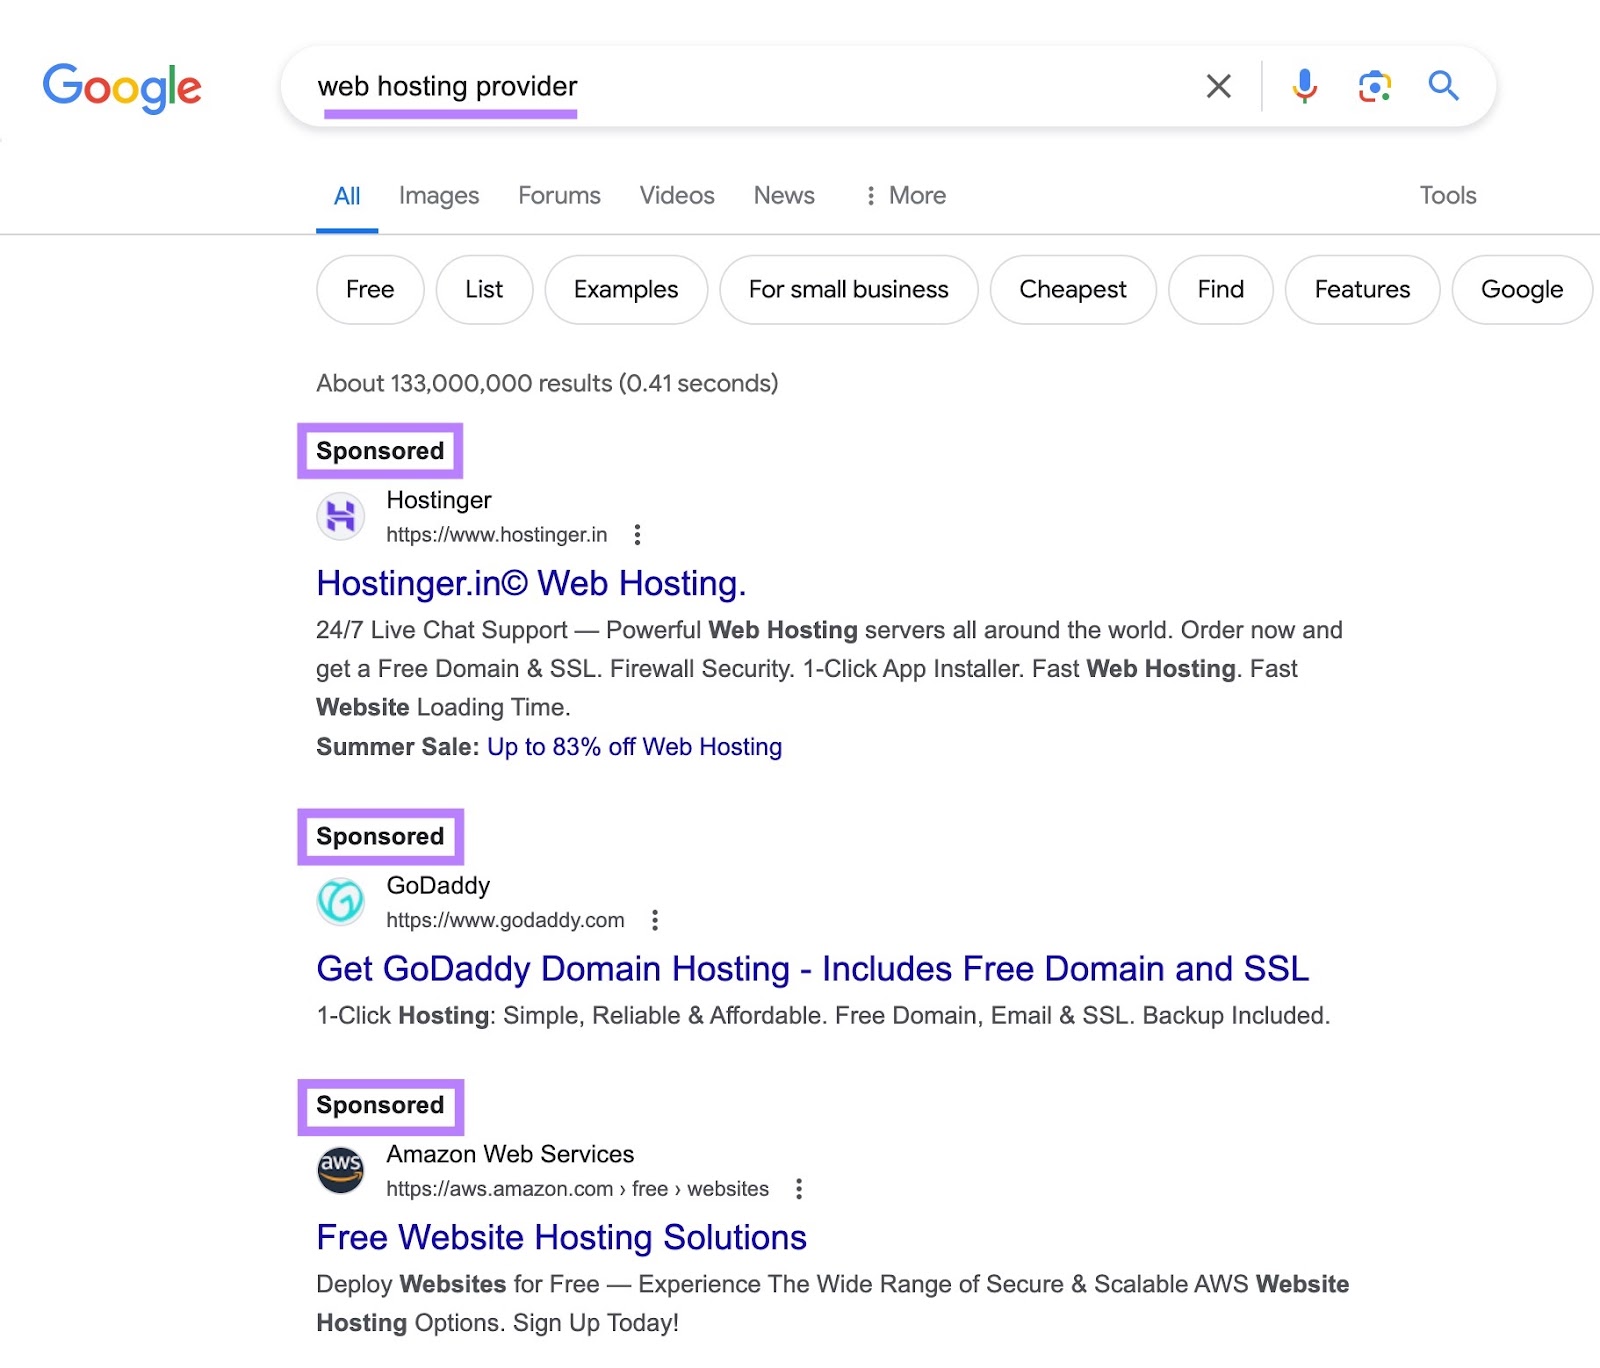 “Sponsored" results on Google serp for "web ،sting provider" query